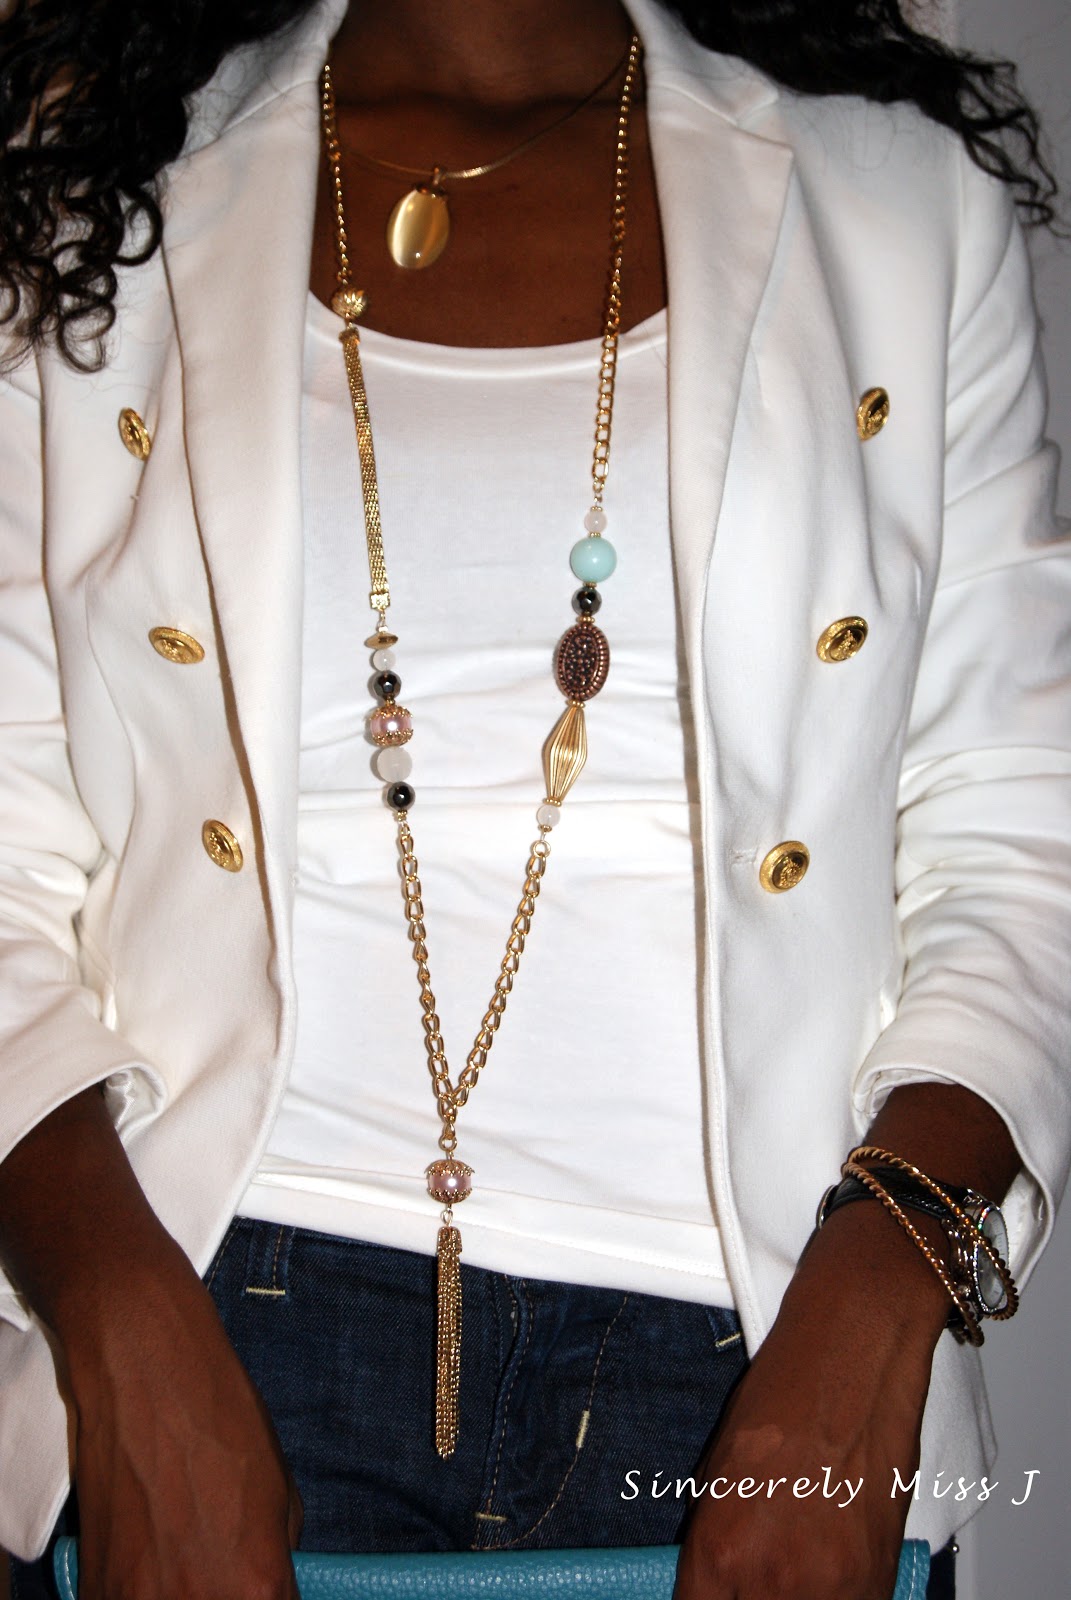 Blazer: Zara, Necklaces: short necklace: Le chateau, long necklace: dynamite, Jeans: warehouse sale ( Miss Sixty Jeans), clutch: store in downtown Toronto